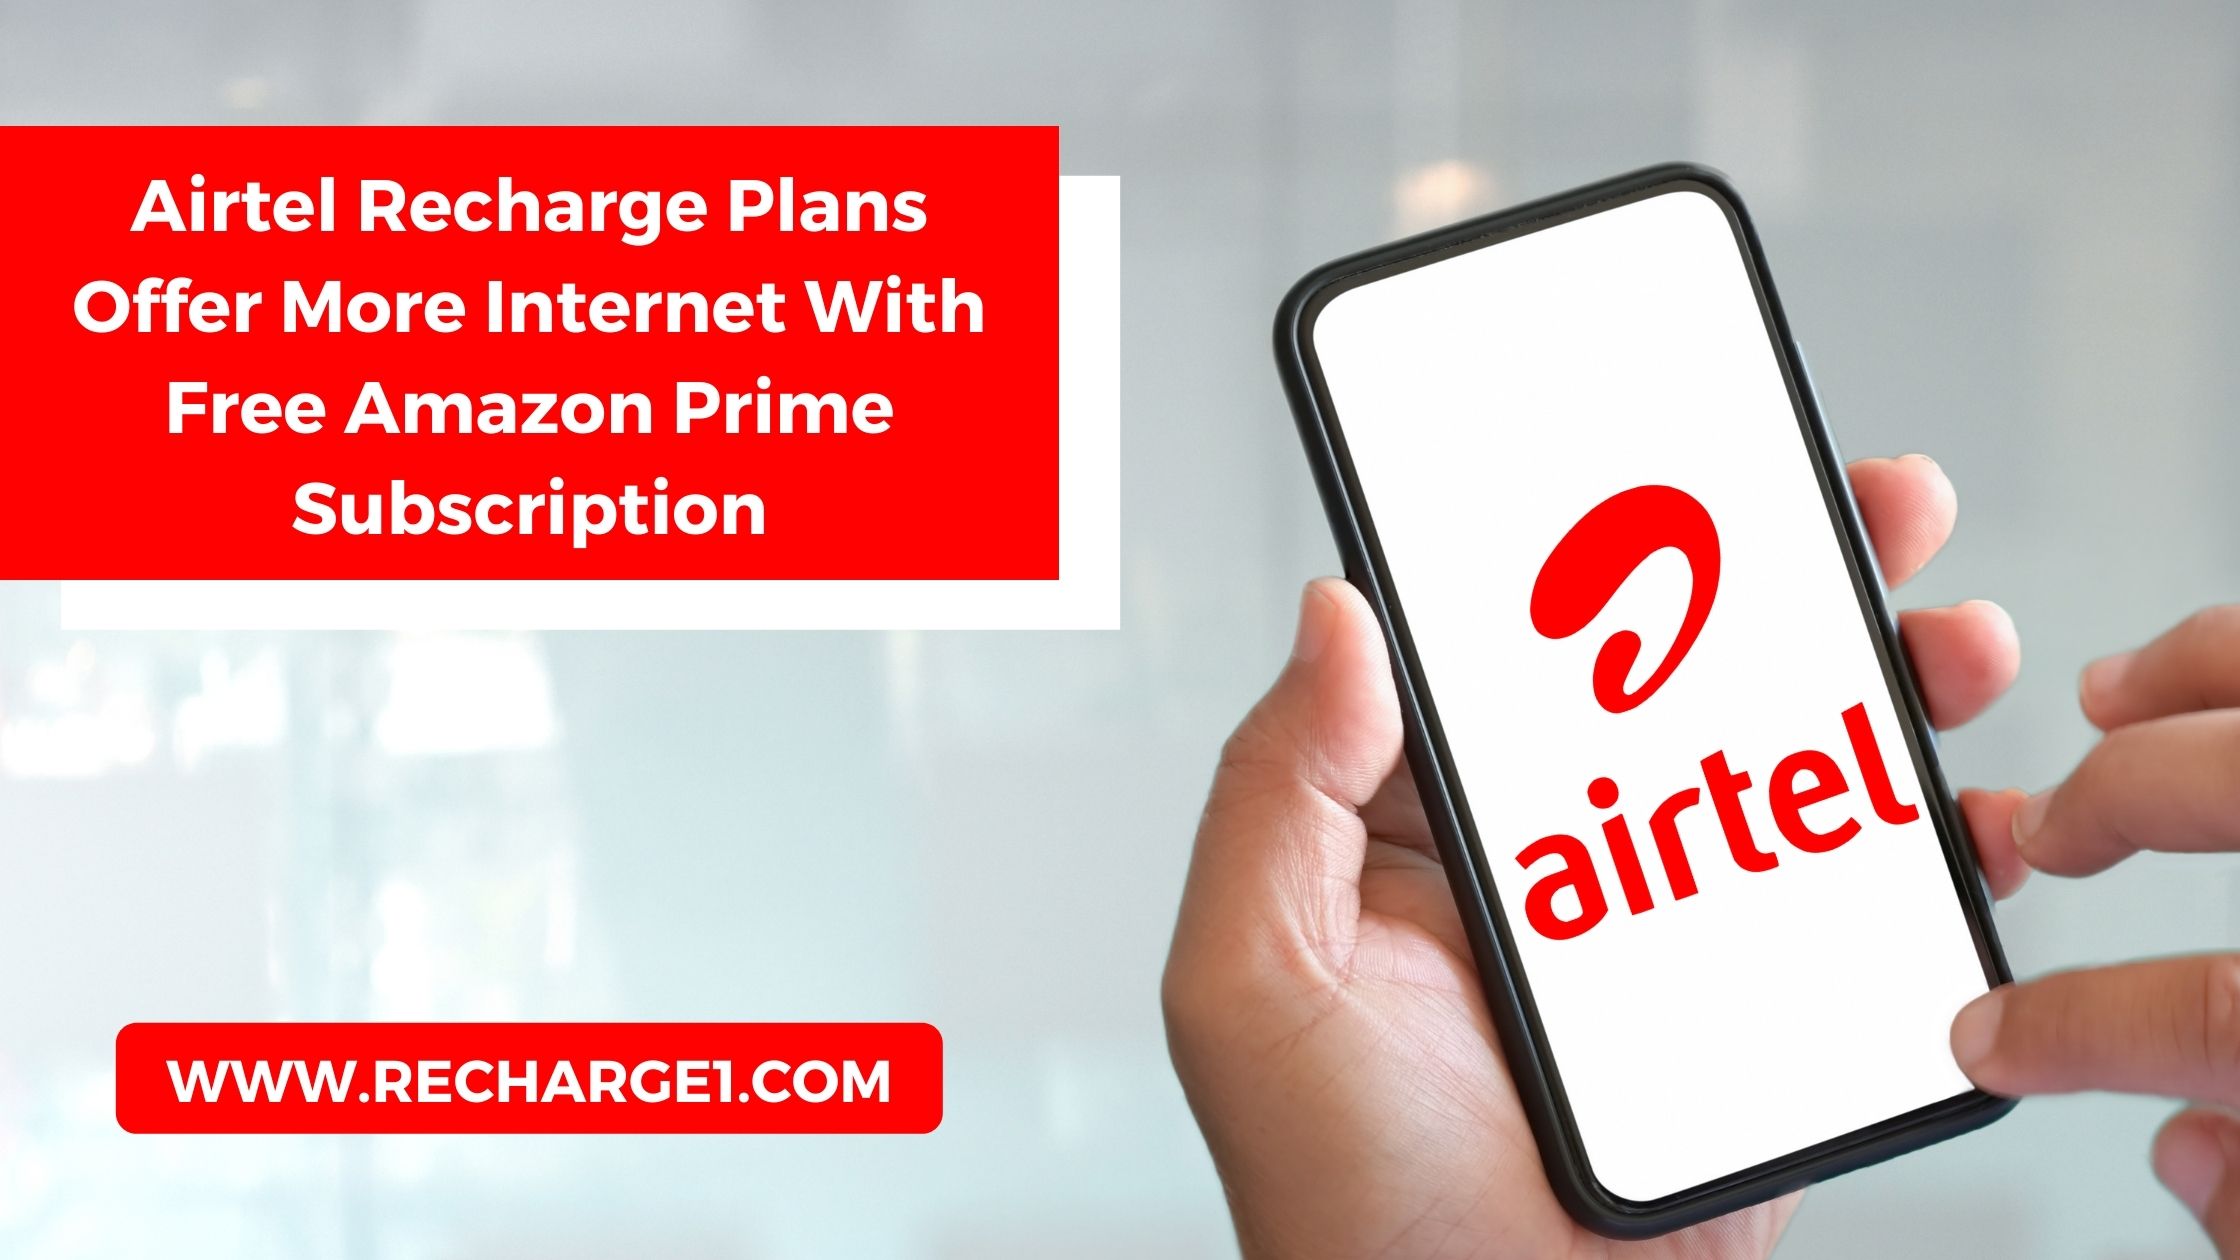 Airtel Recharge Plans Offer More Internet With Free